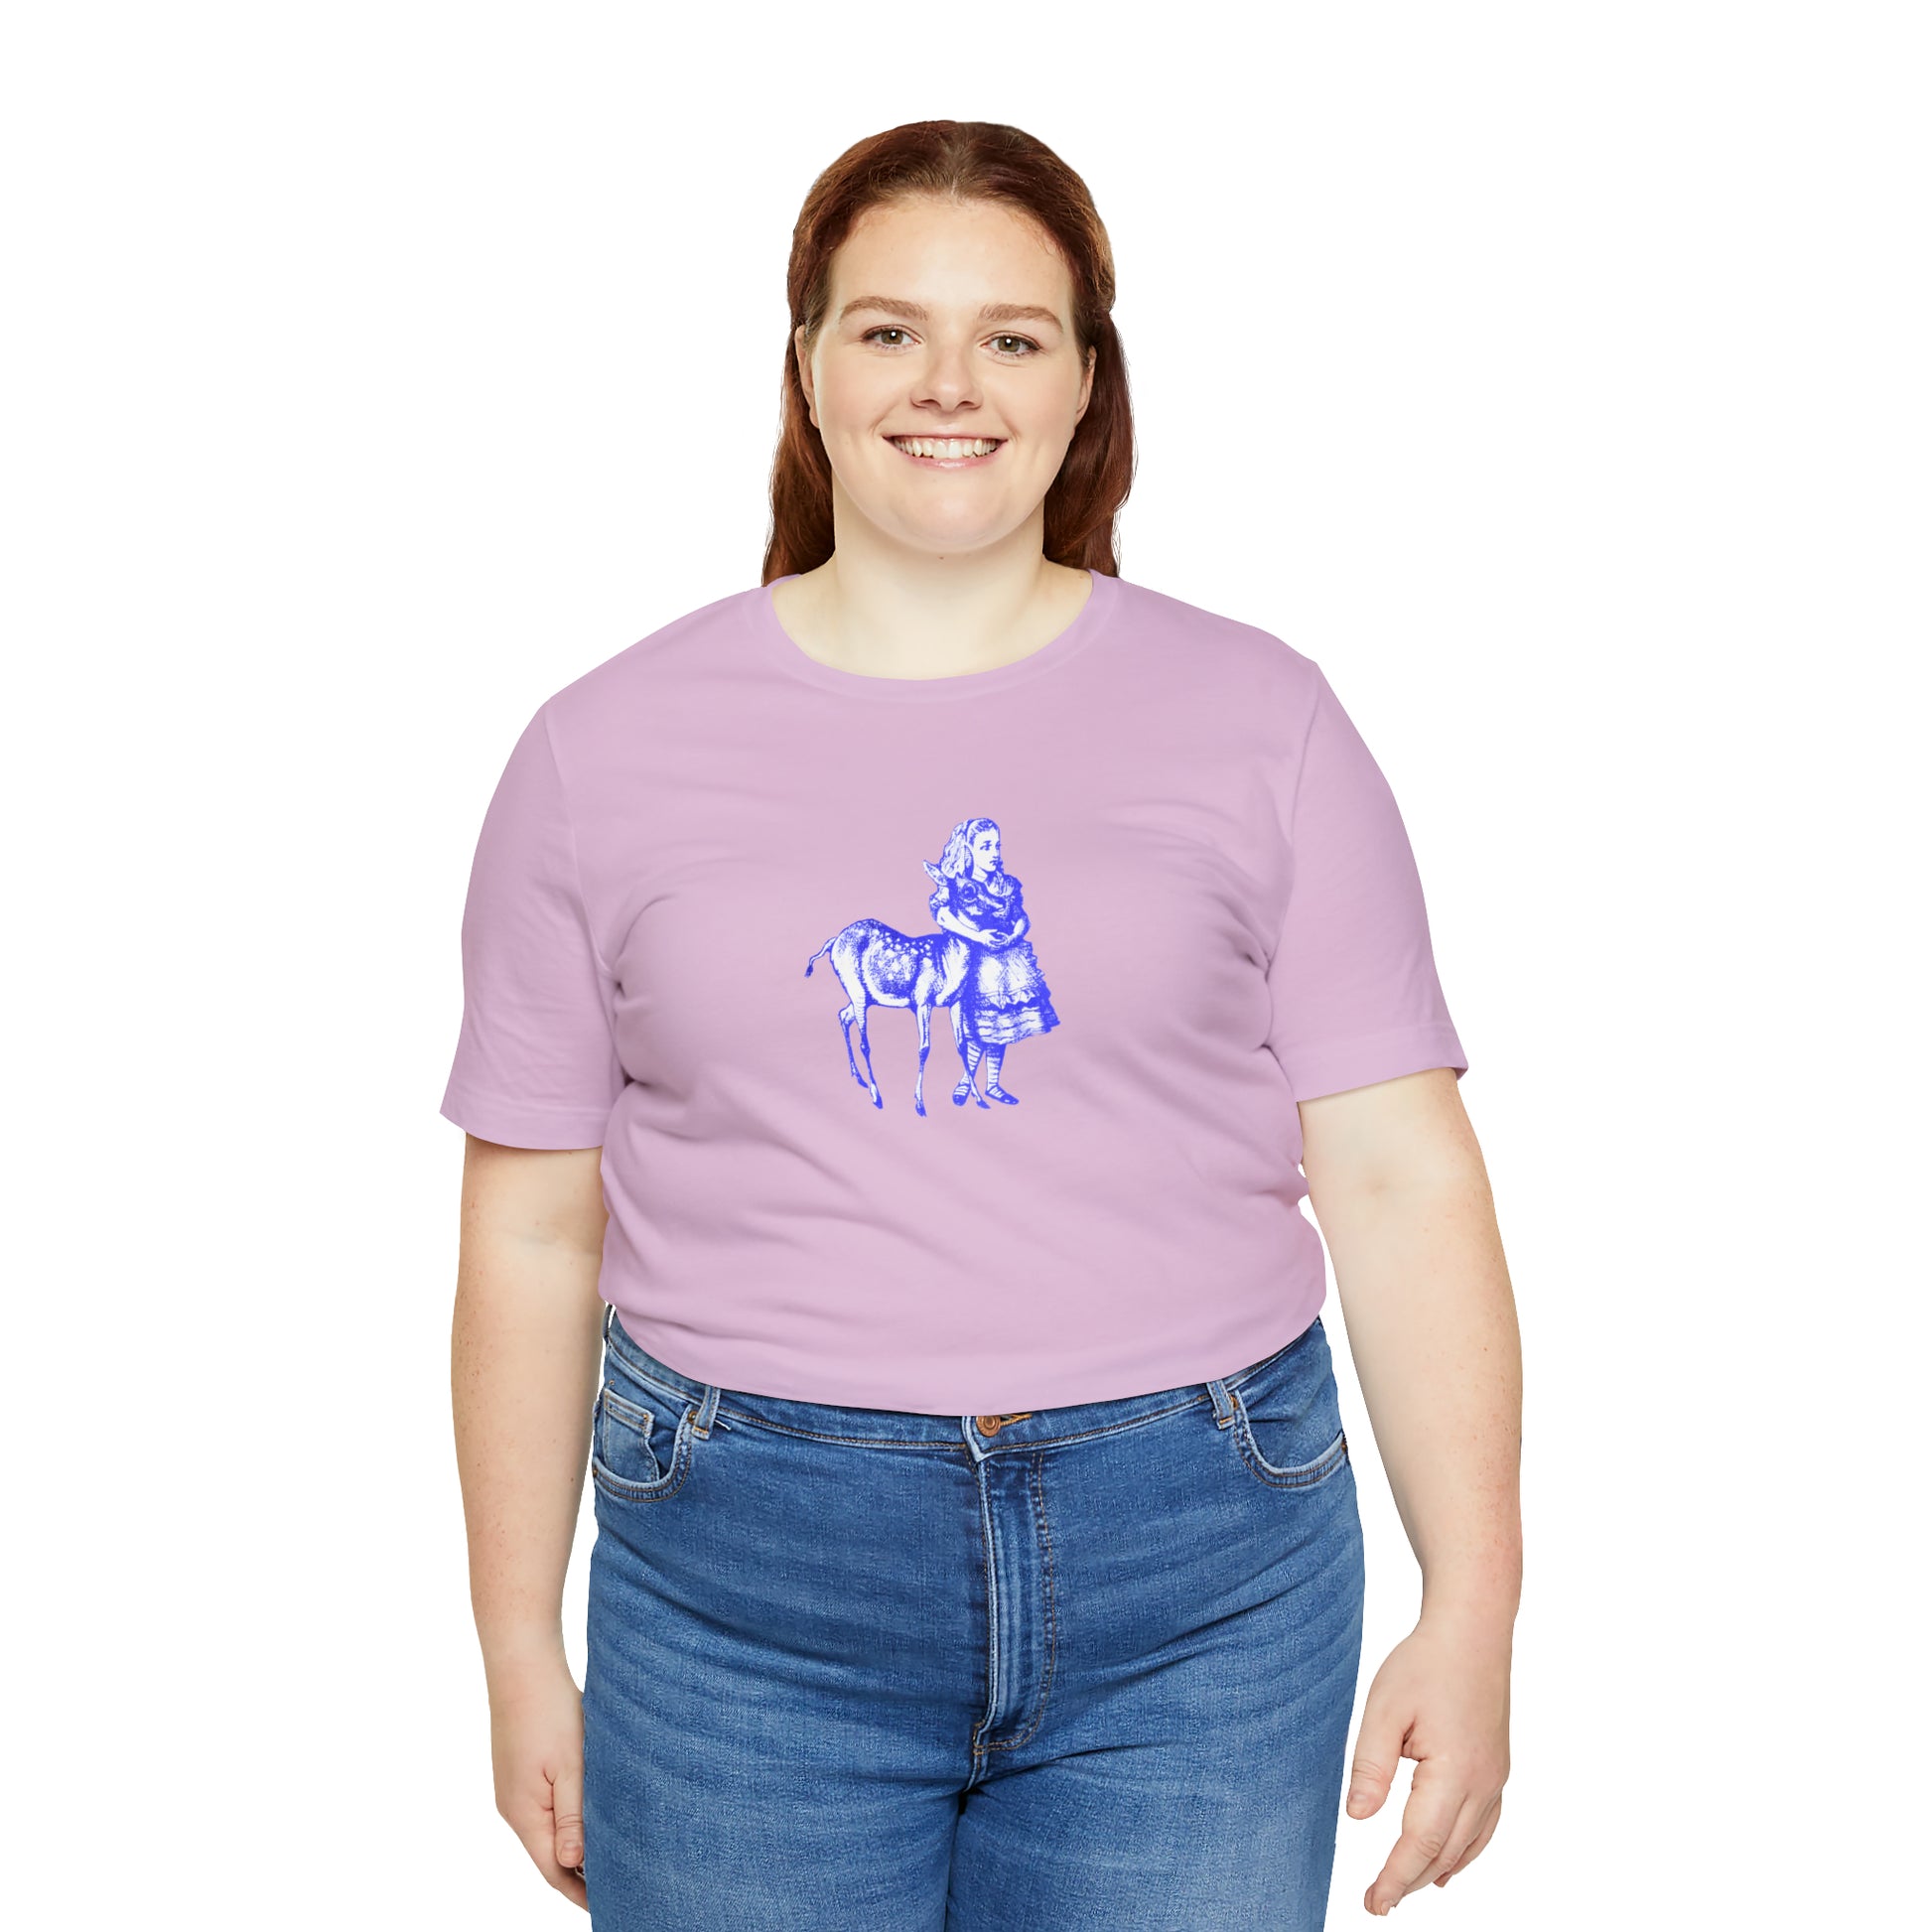 A smiling plus sized woman wearing a light purple t-shirt with an illustration of Alice in Wonderland and a baby deer printed in blue.